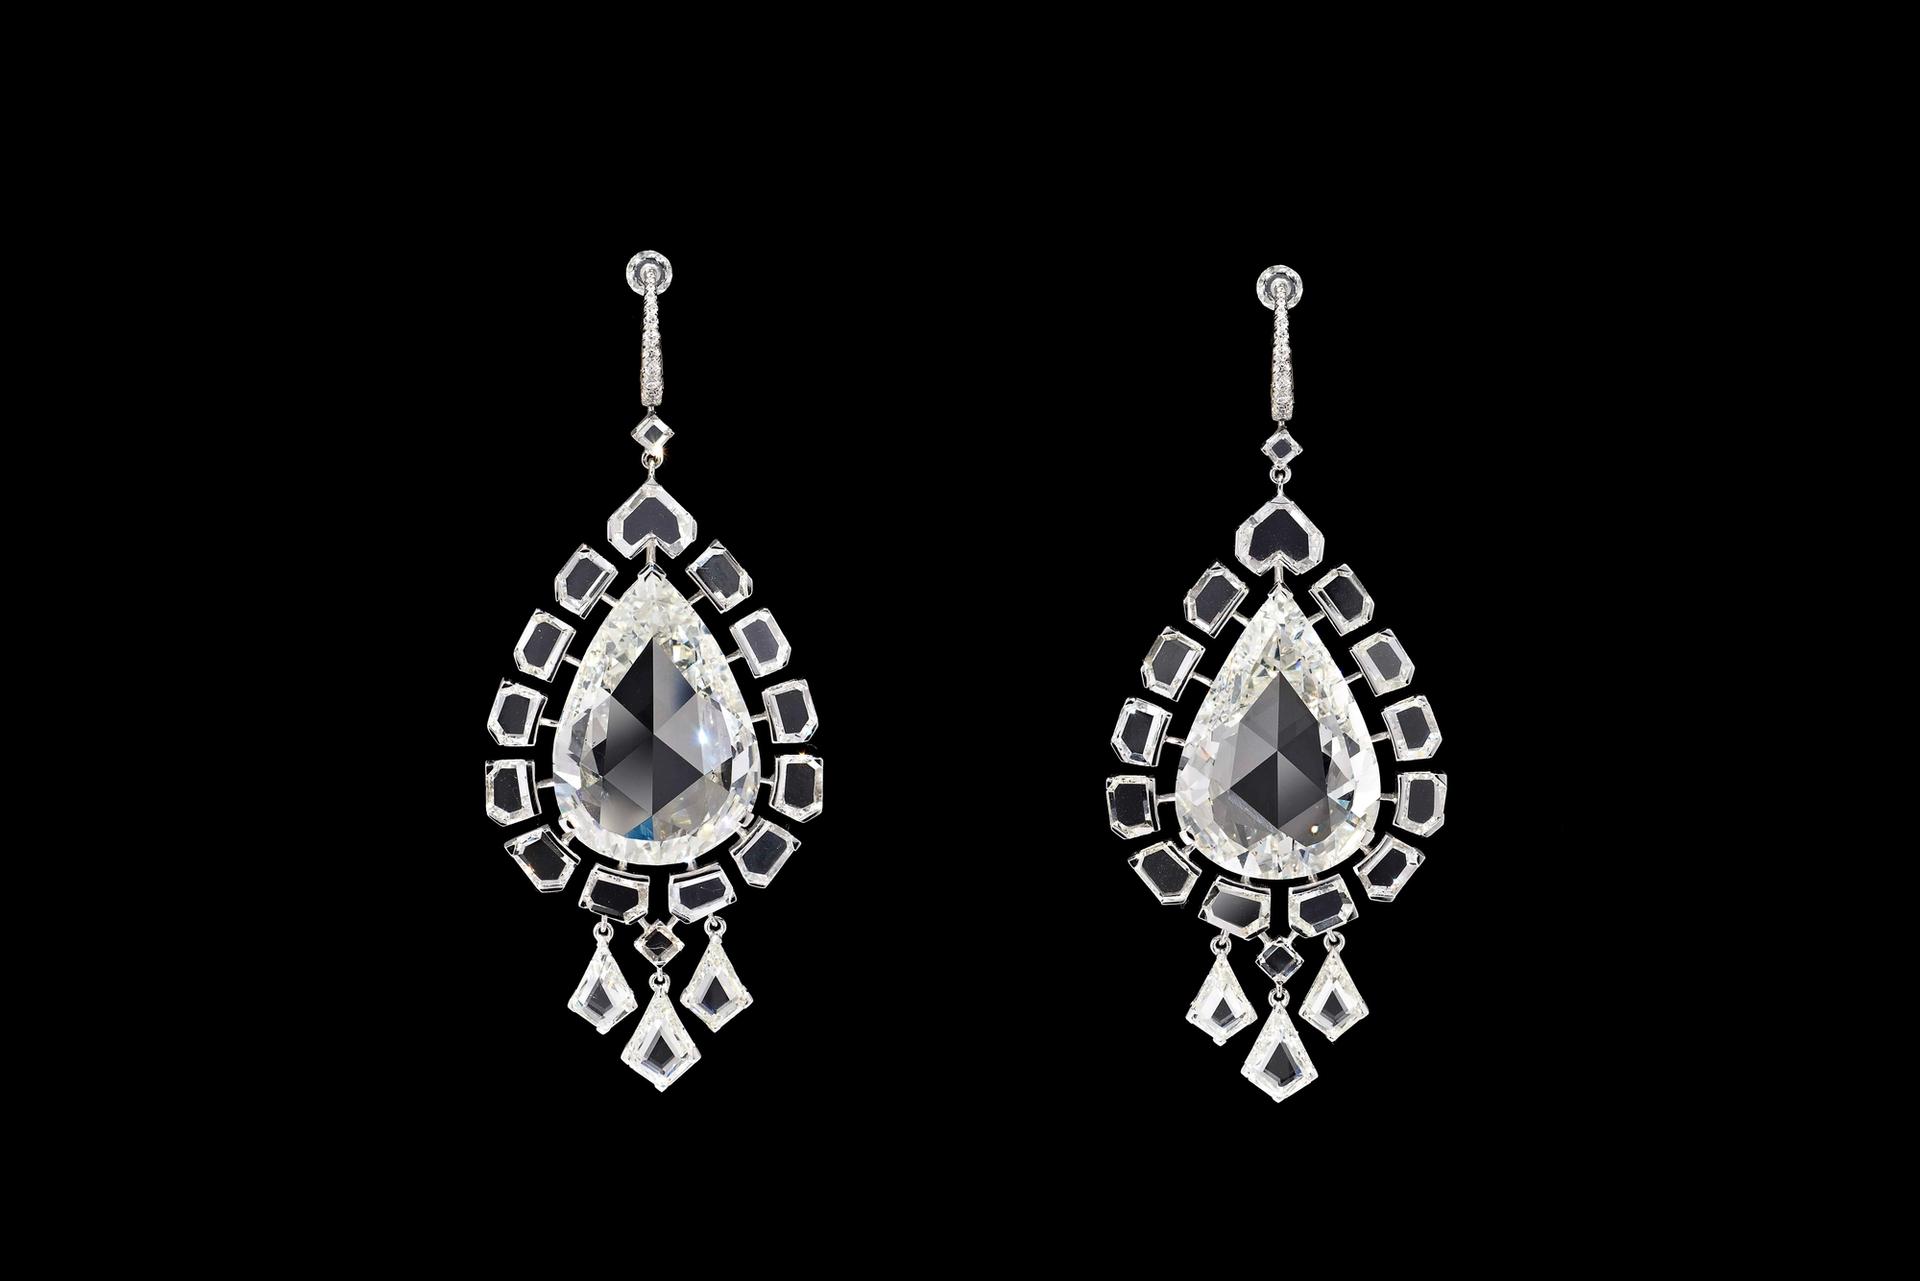 the pair of stolen earrings (the two pear-shaped diamonds are individually 14.4 and 15.75 carats each) Copyright The Al Thani Collection'